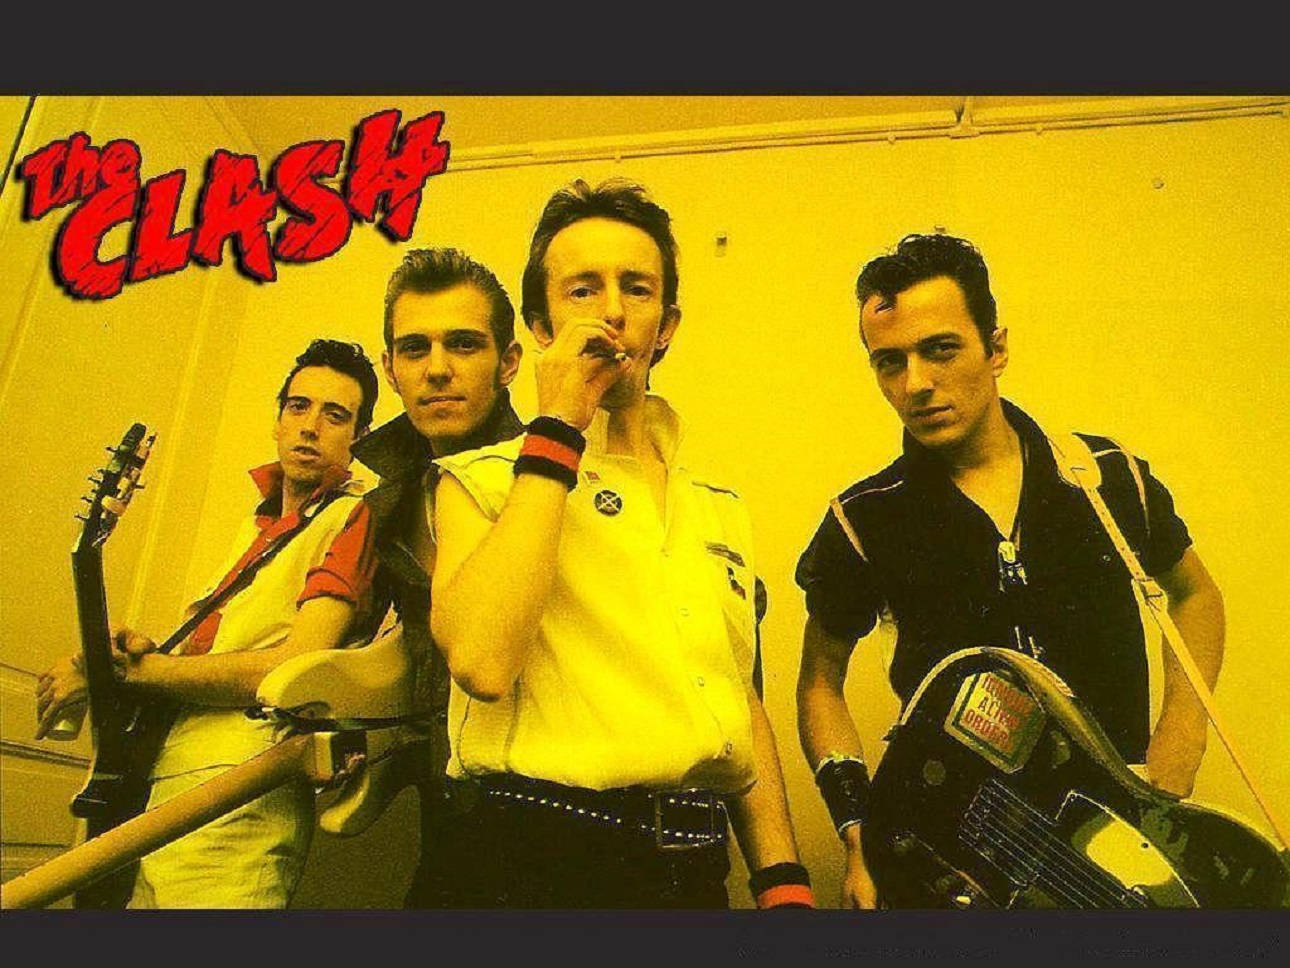 The Clash New York City Concert 1979 Poster